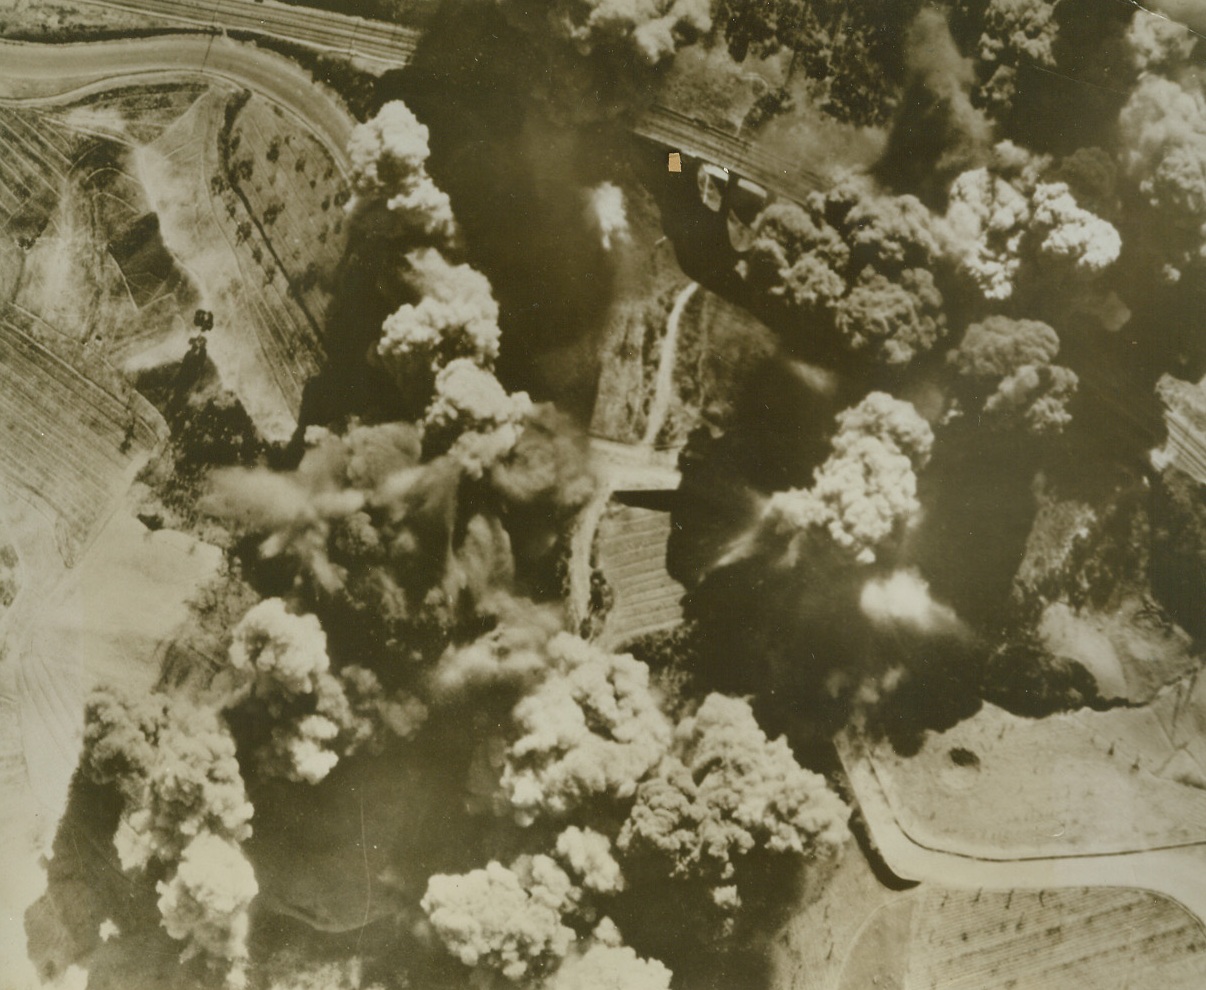 Mission Accomplished, 4/23/1944. ITALY – Clouds of black smoke billow skyward and shroud the target after a Mediterranean Allied Air Forces raid by B-26 Marauders had successfully bombed out the strategic structure. Returning pilots and bombardiers reported an excellent concentration of bombs on this 11-span viaduct at Arezzo, Italy. USAAF Photo from Acme;